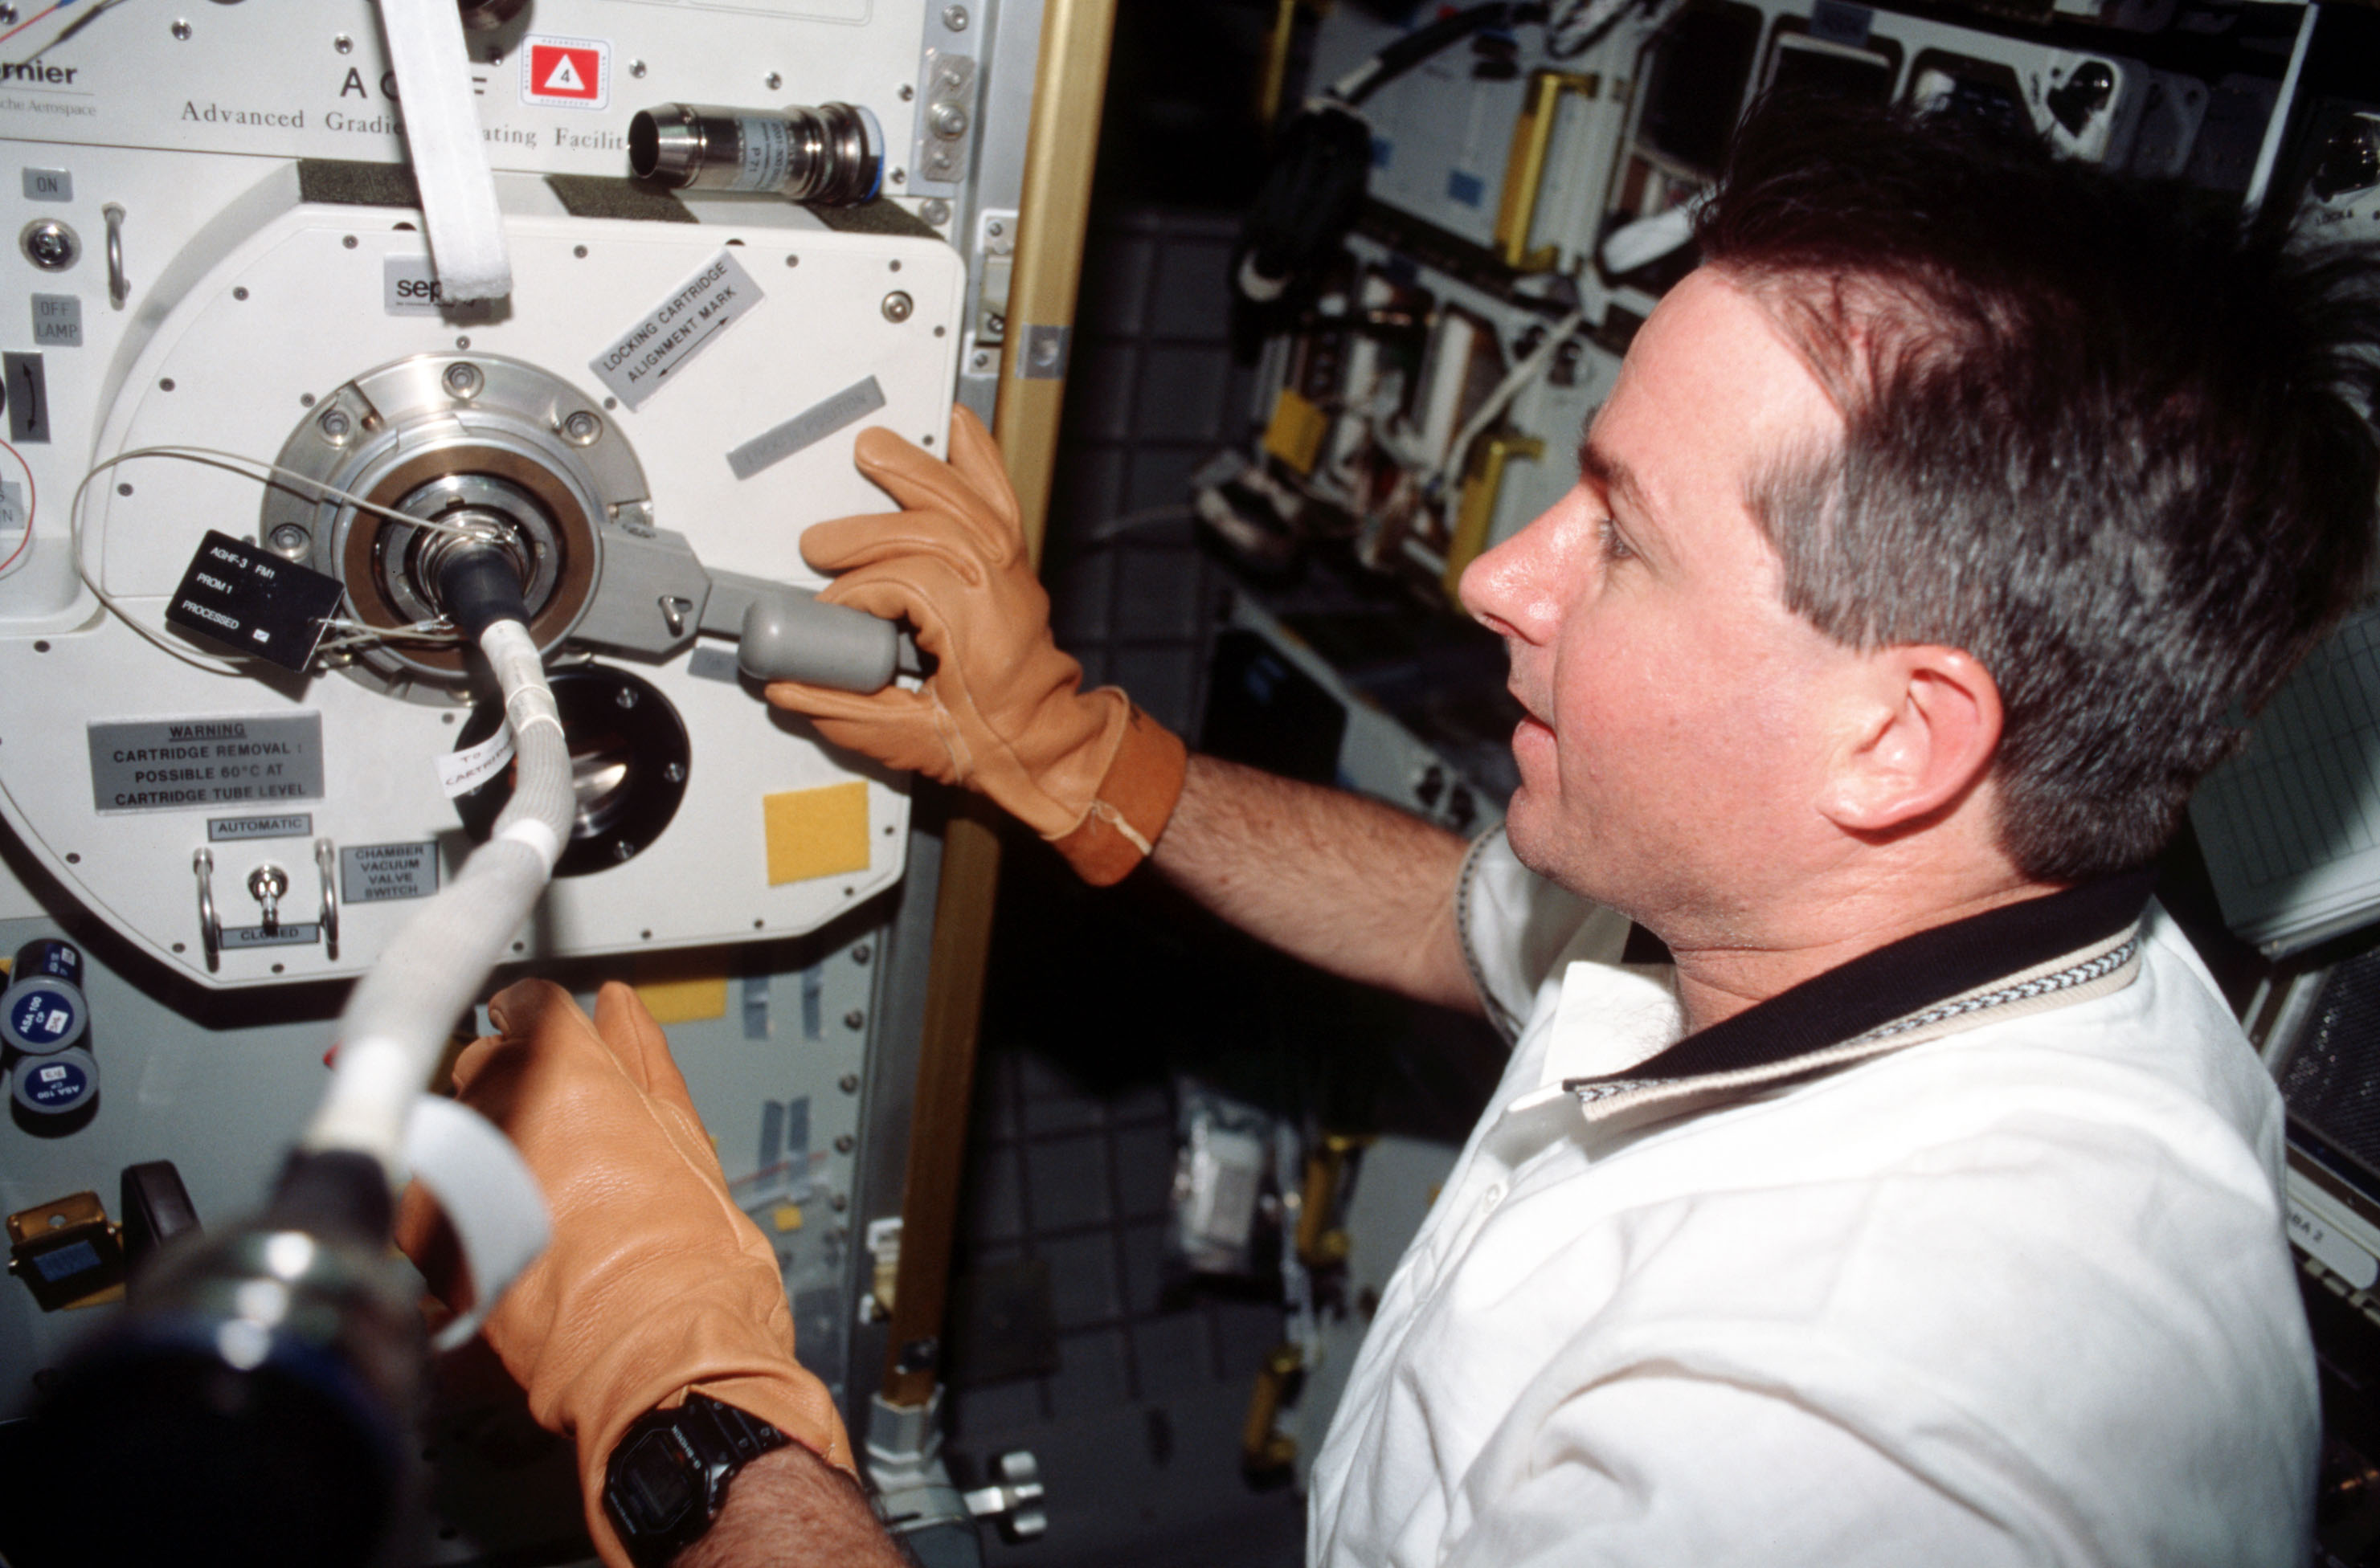 Stephen K. Robinson processes a sample in the Advanced Gradient Heating Facility (AGHF)